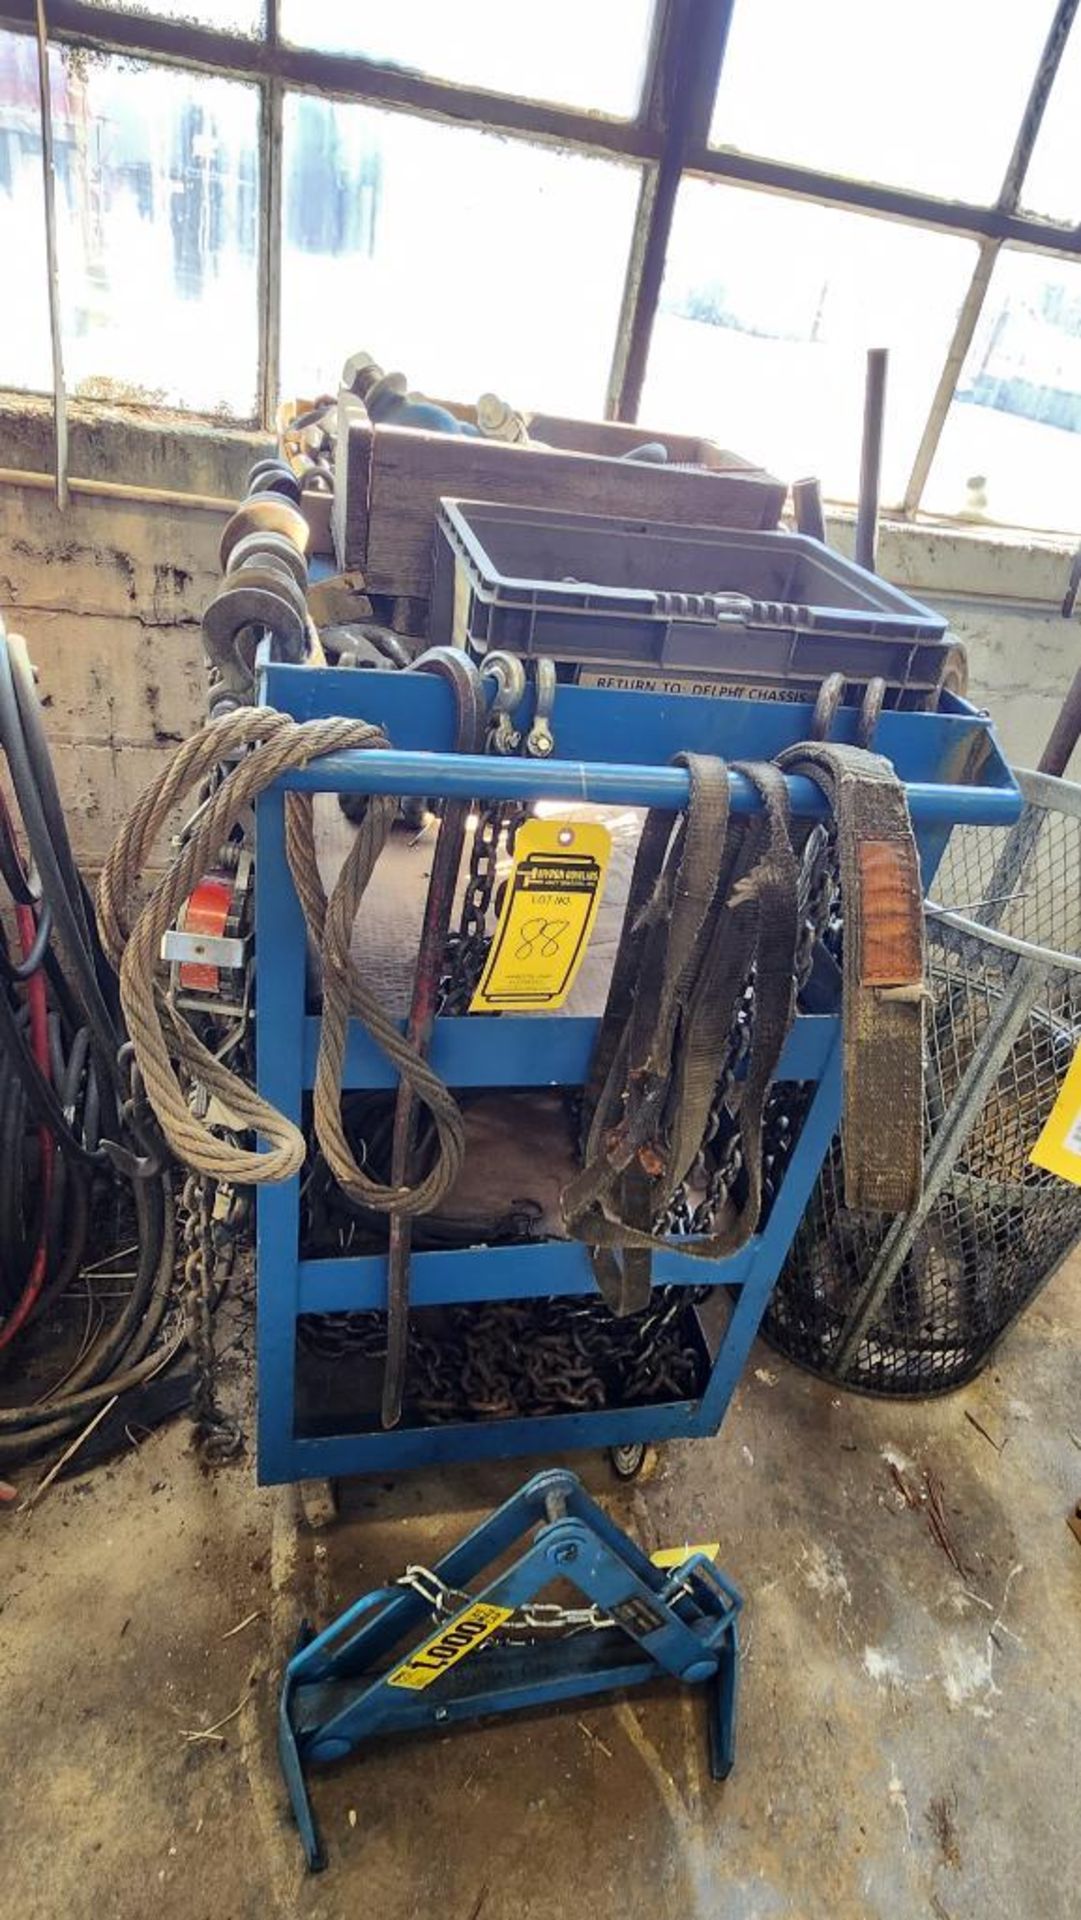 Steel Shop Cart w/ Content of Rigging Chains, Hooks, Eyebolts, Shackles, Rigging Harnesses